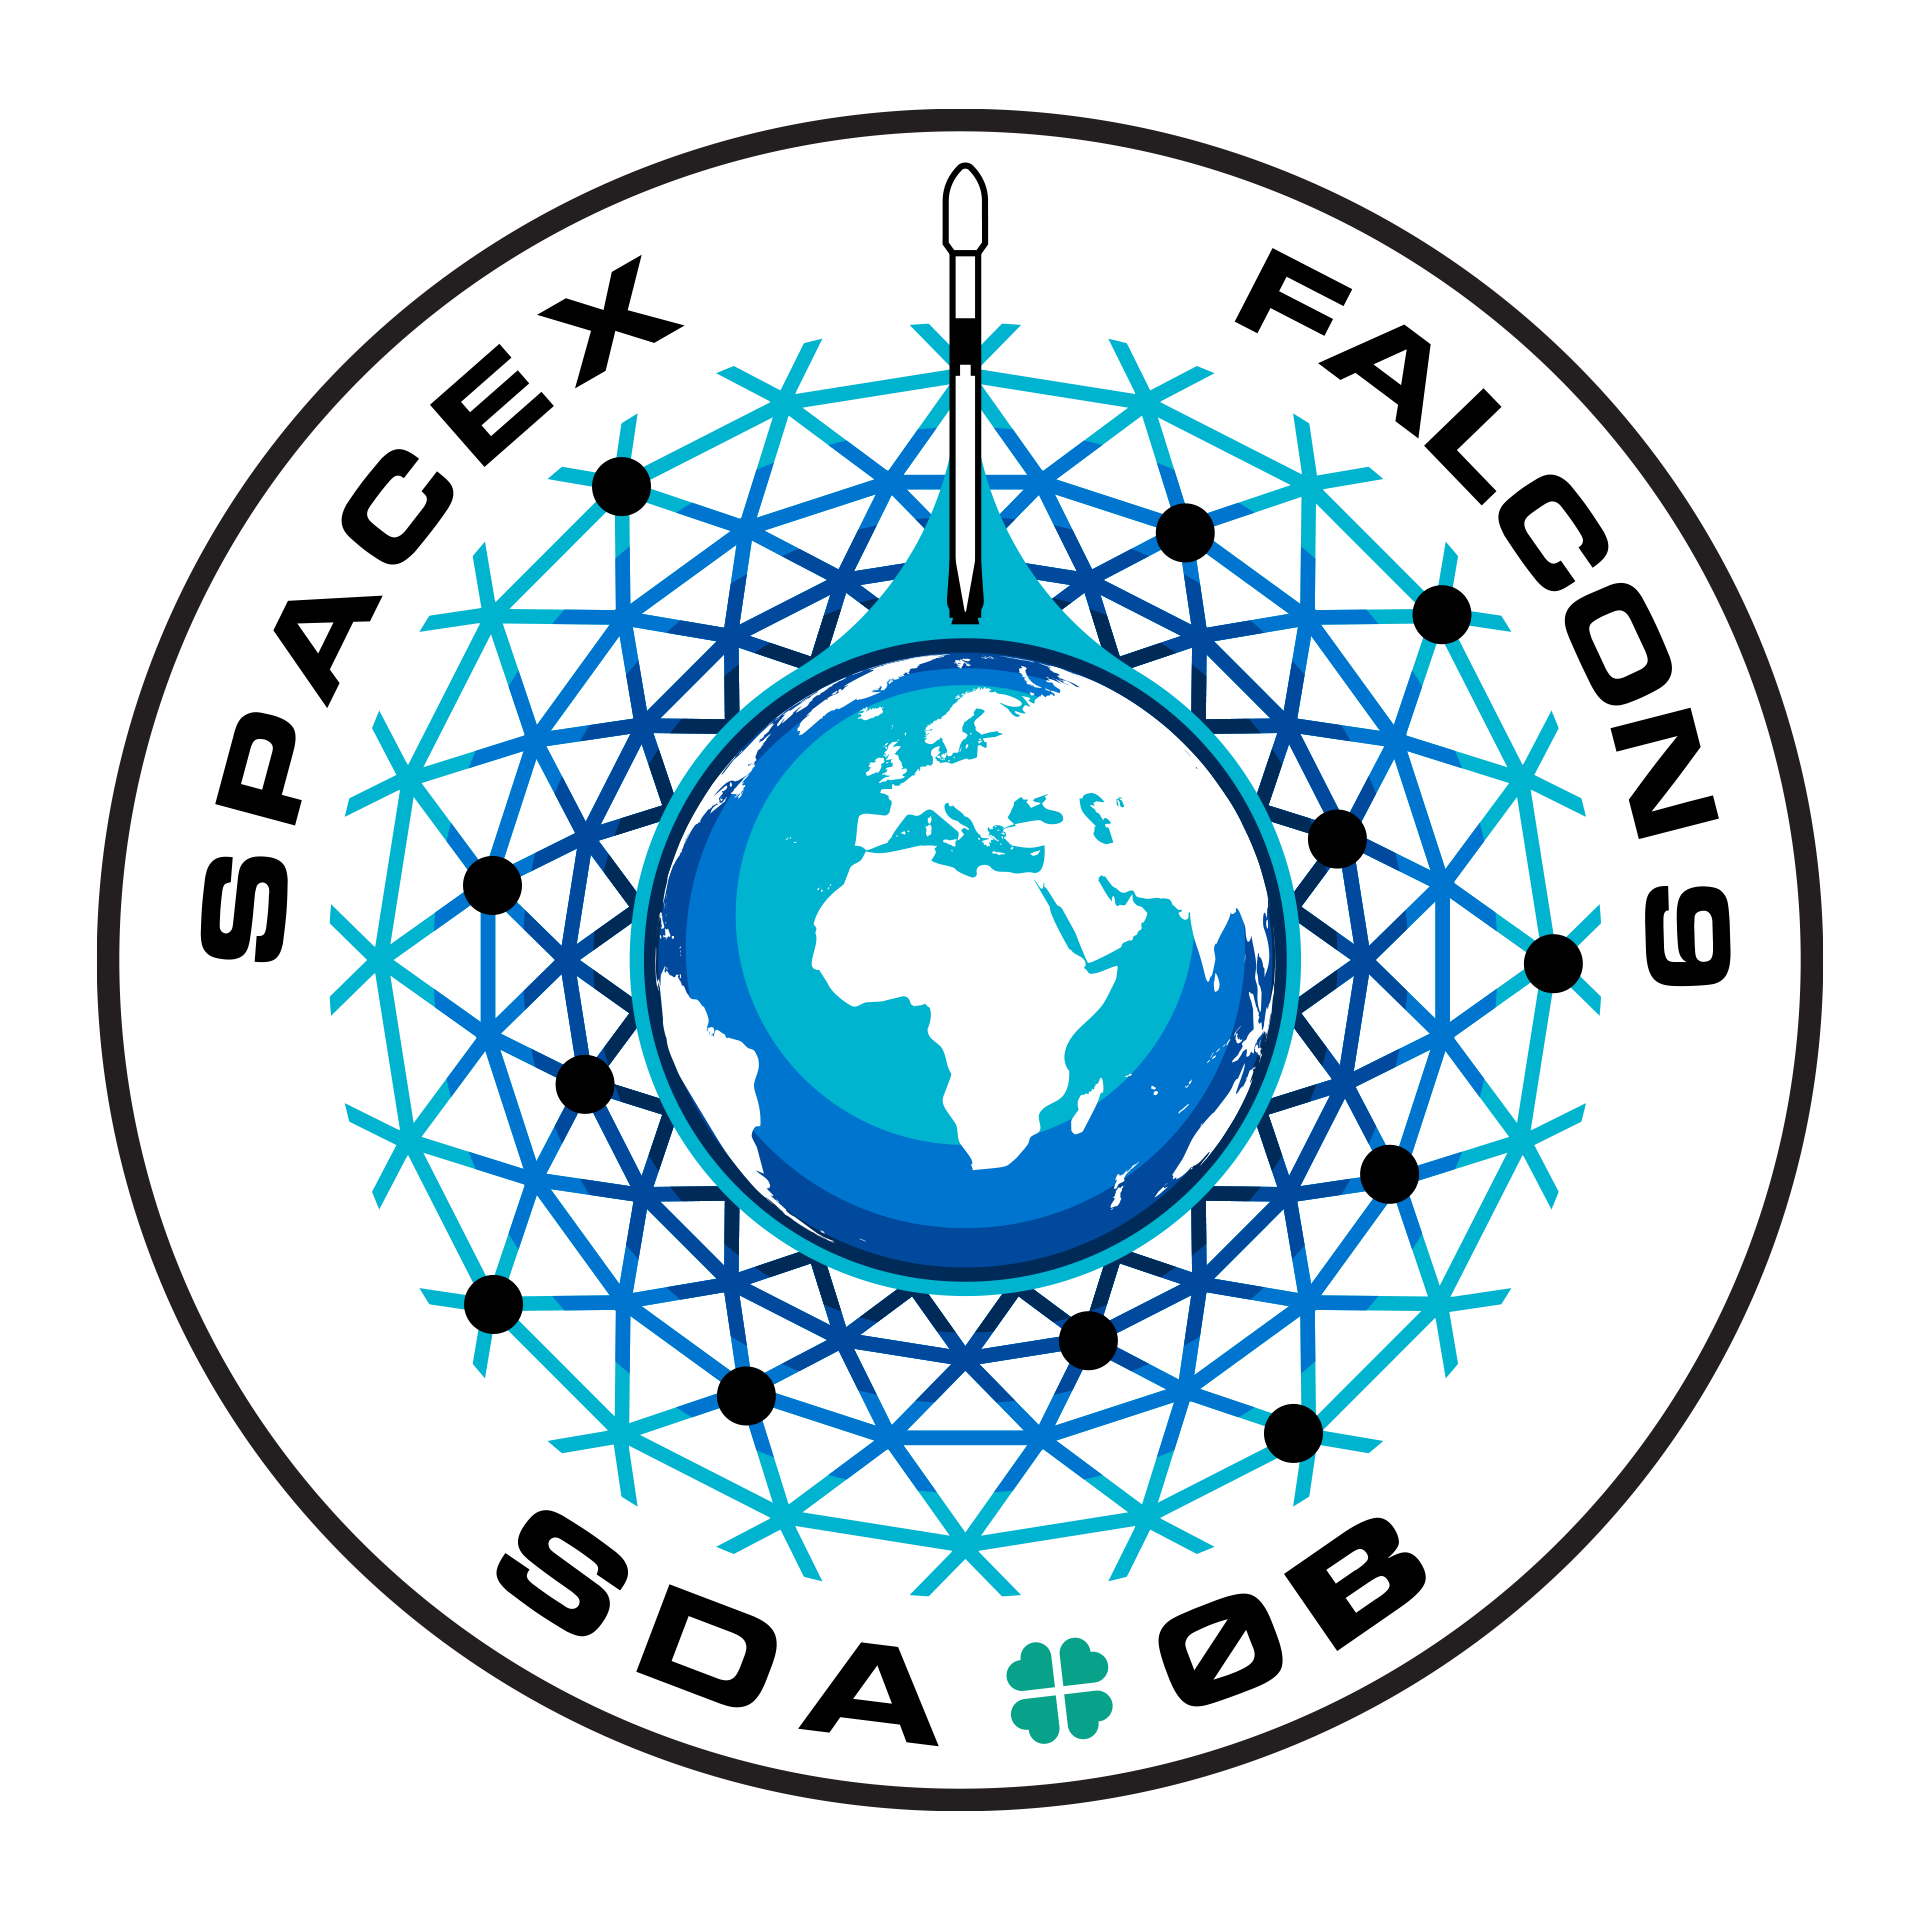 Mission patch for SDA Tranche 0B